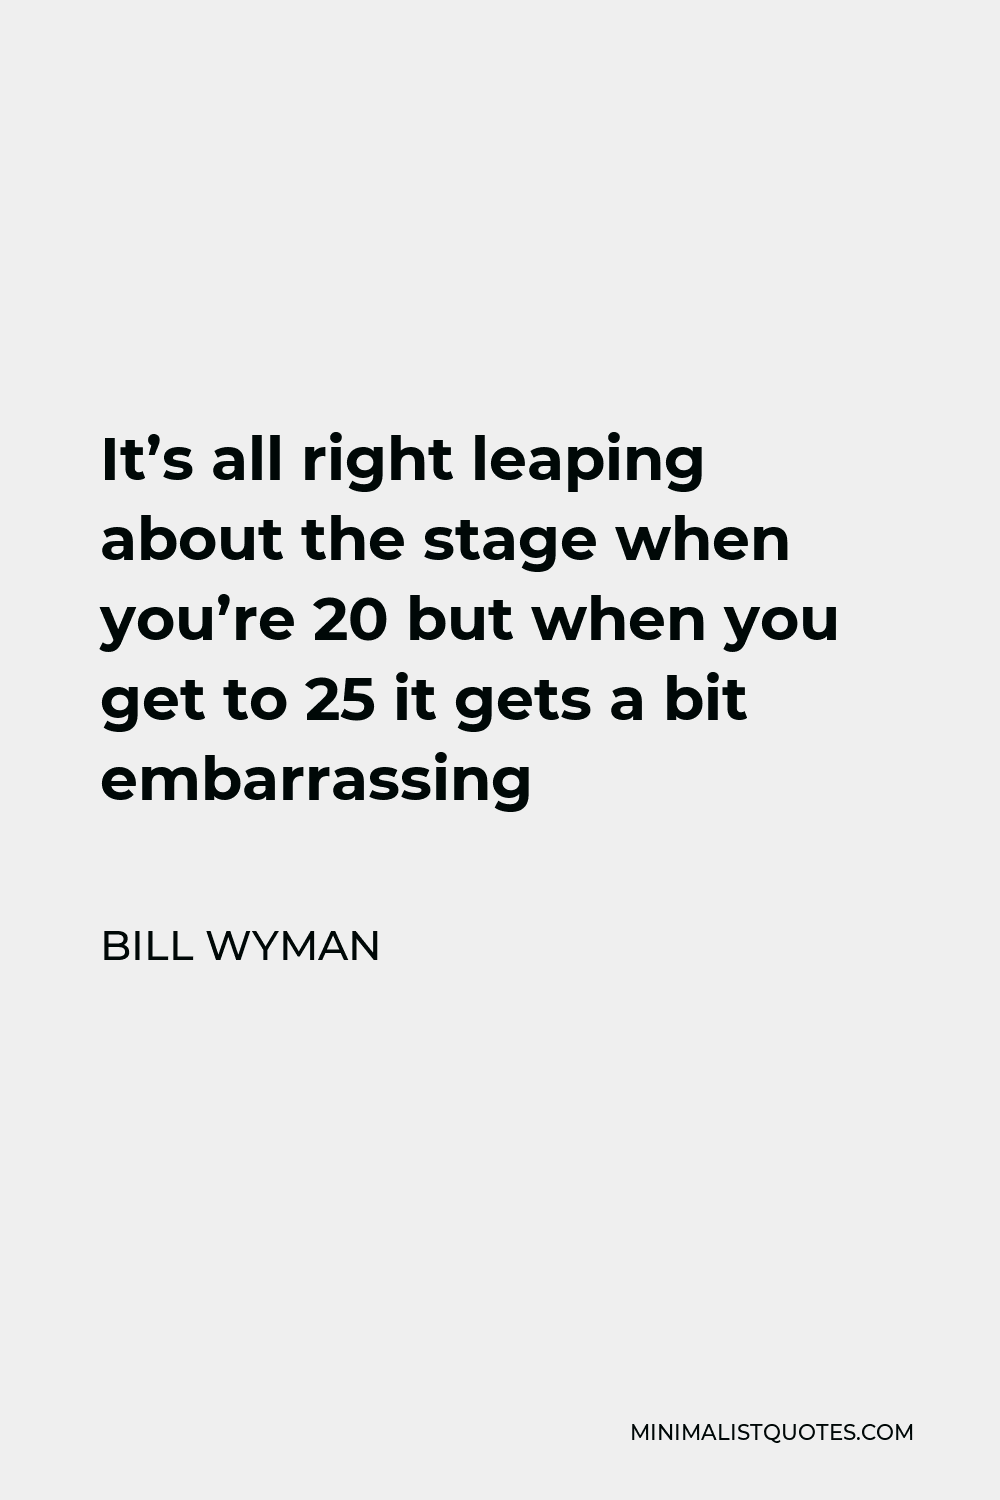 Bill Wyman Quote - It’s all right leaping about the stage when you’re 20 but when you get to 25 it gets a bit embarrassing